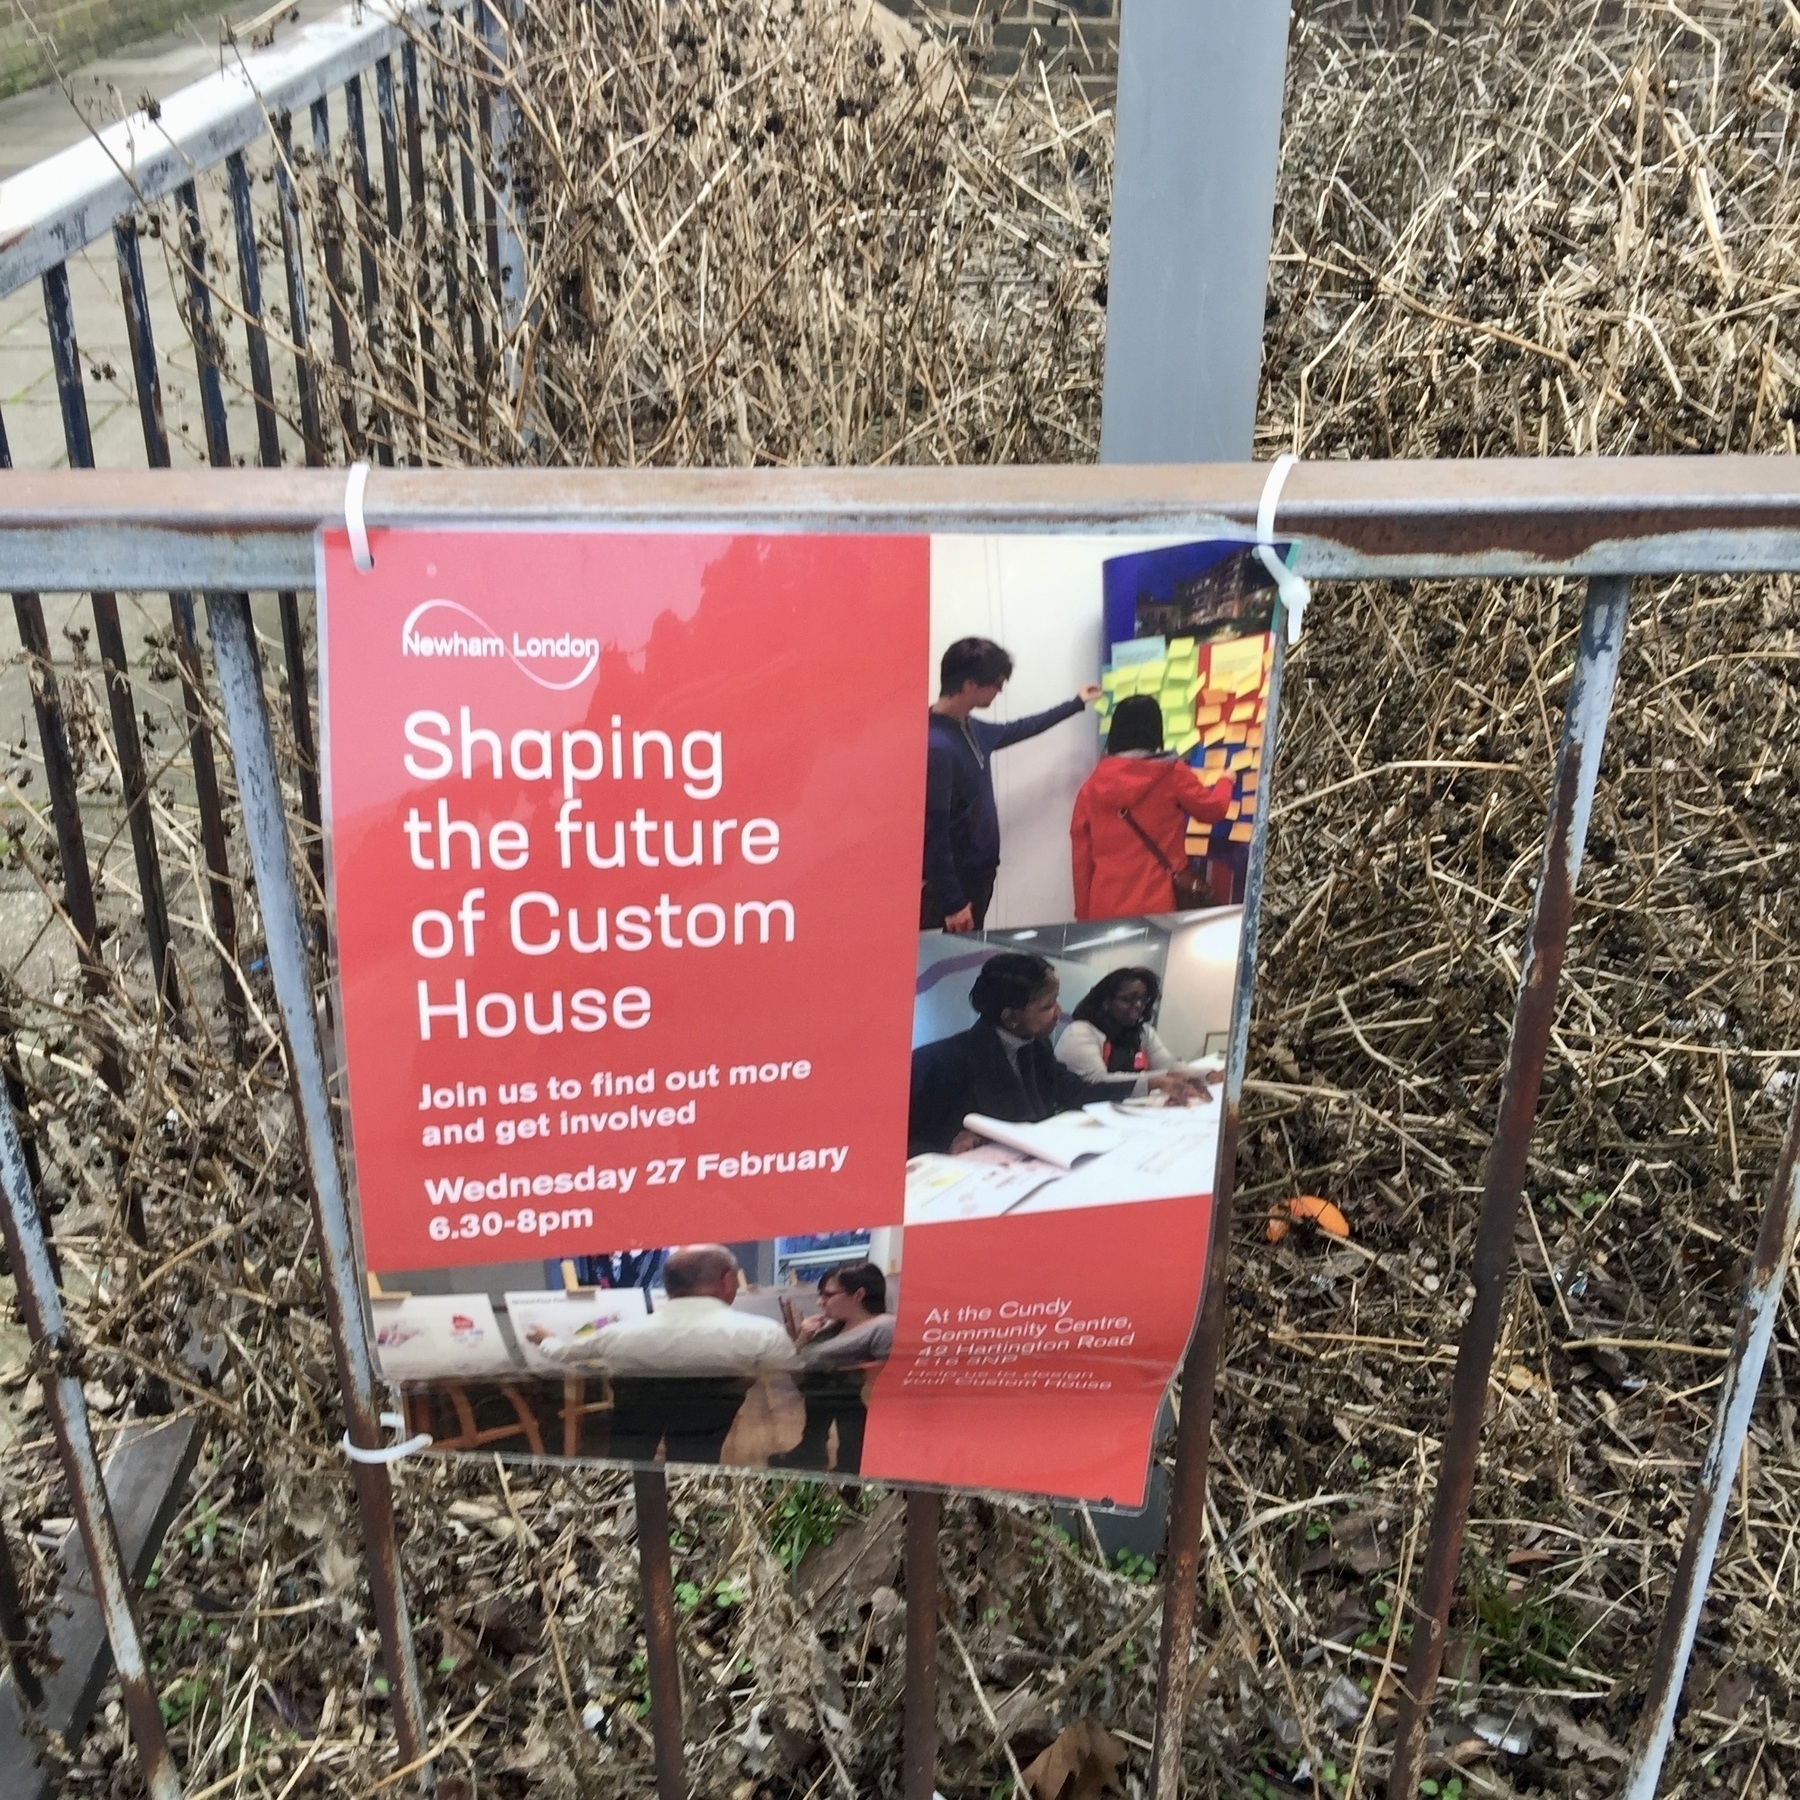 A red poster advertising a community event fixed to a dilapidated metal fence, behind which is dessicated overgrown grass and weeds.